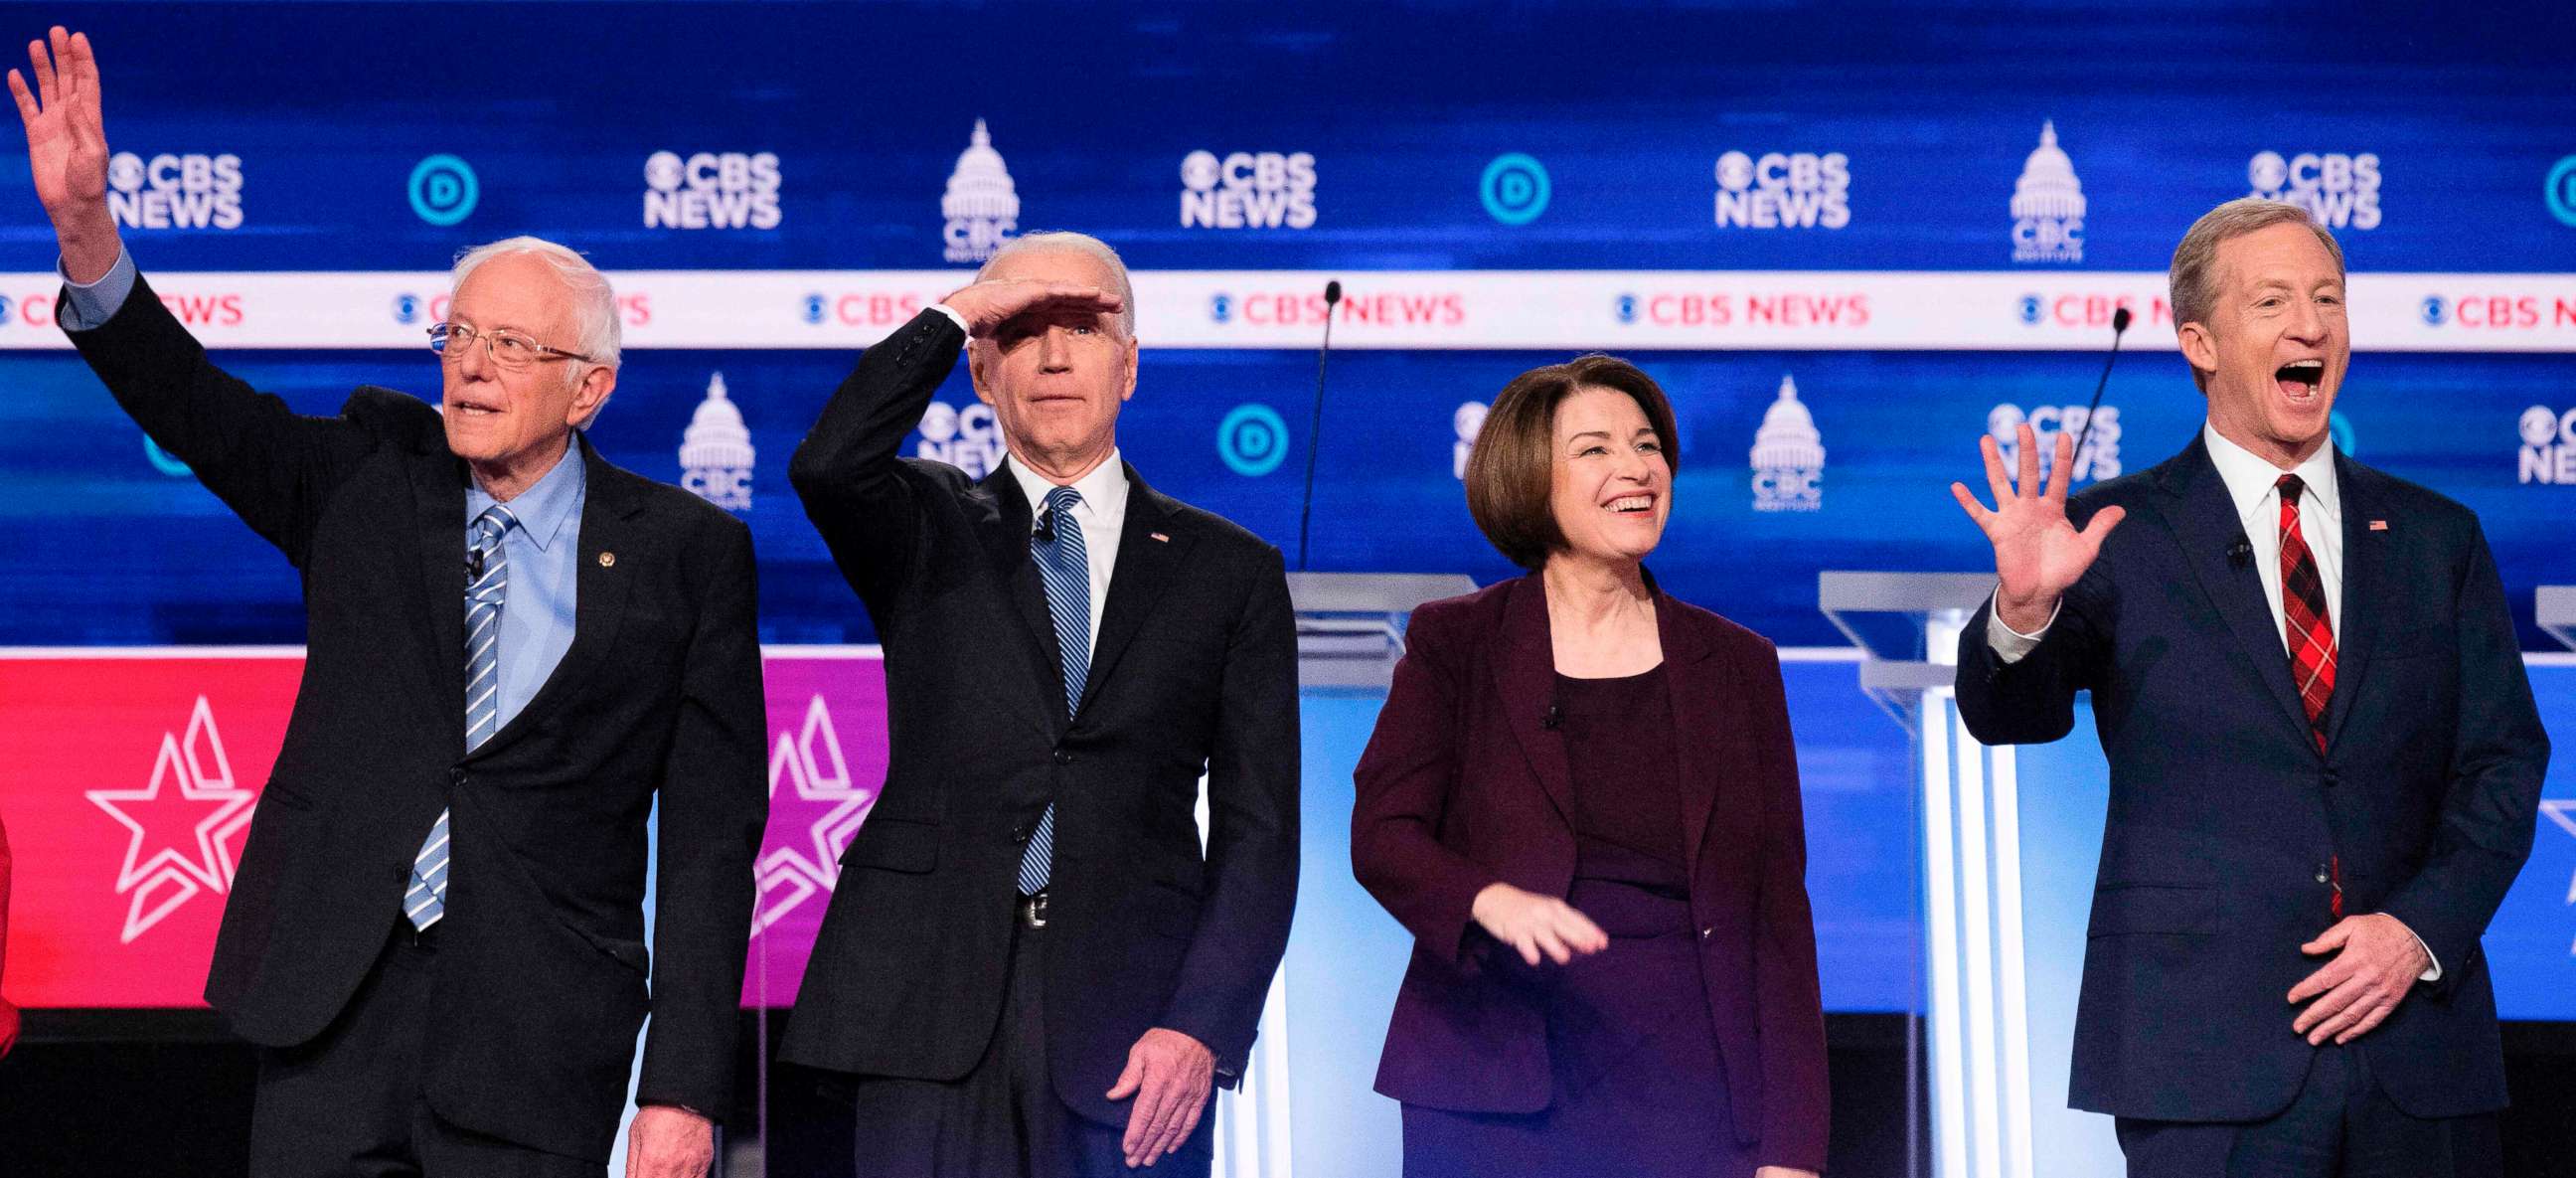 PHOTO: Democratic presidential hopefuls arrive on stage for the tenth Democratic primary debate at the Gaillard Center in Charleston, South Carolina, Feb. 25, 2020.